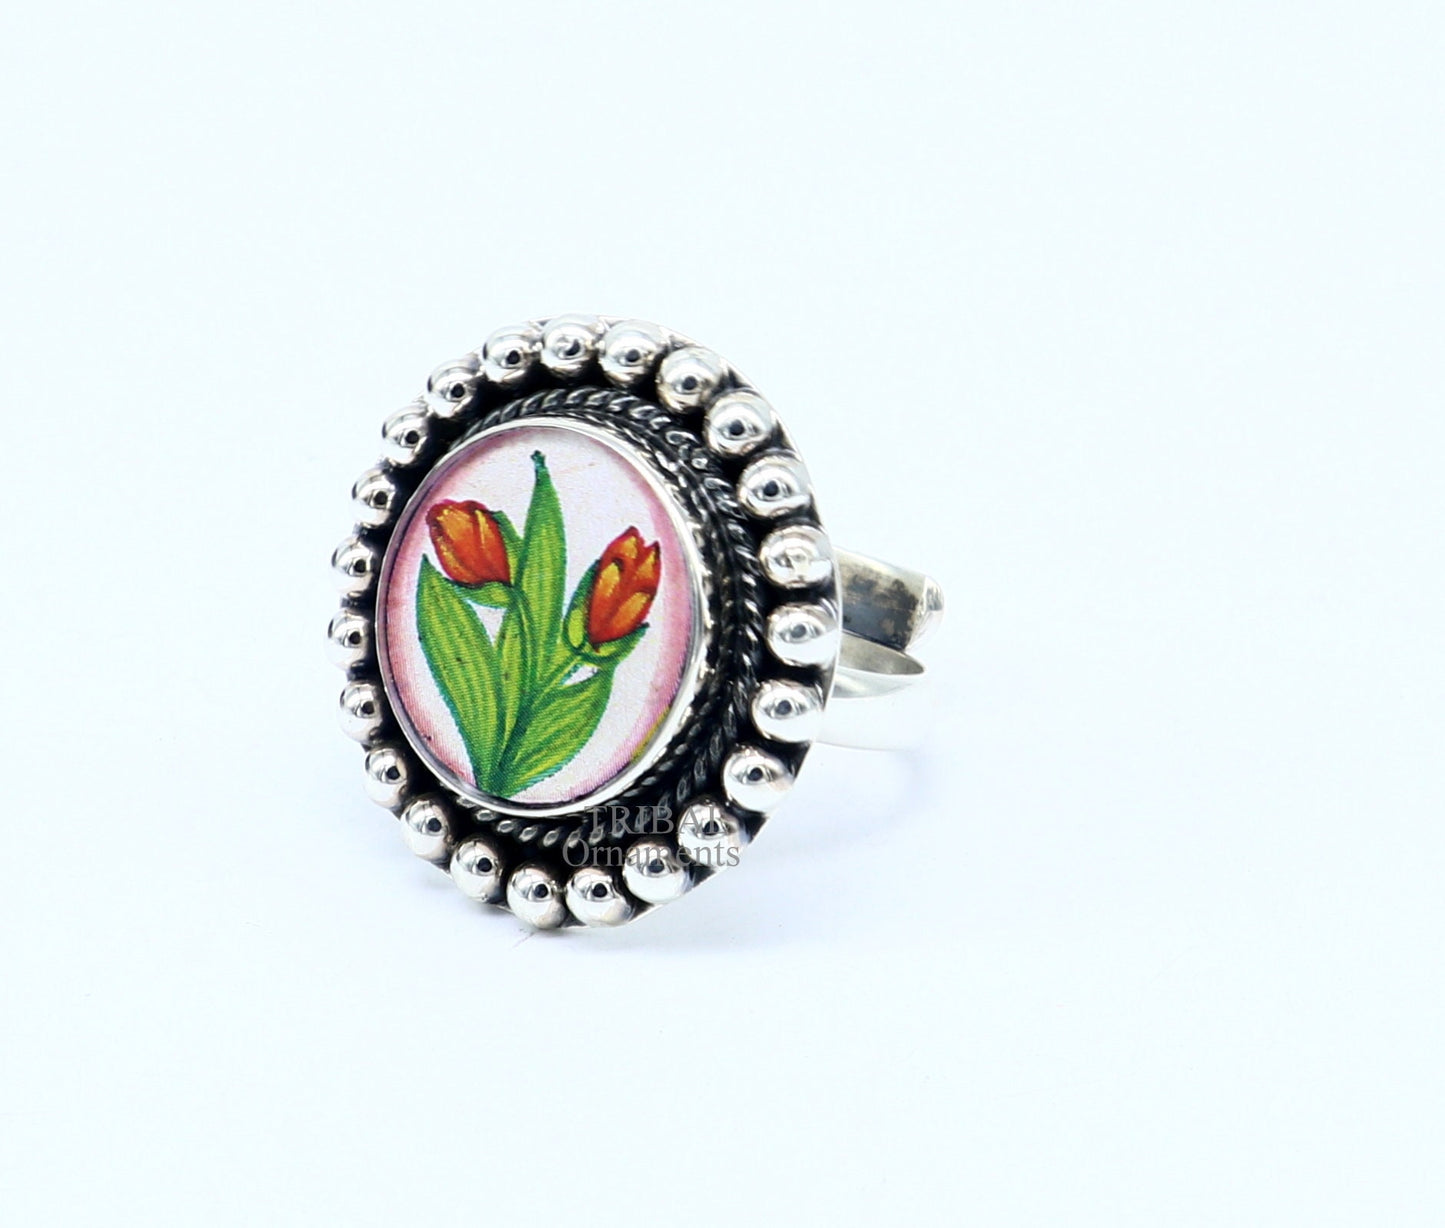 925 sterling silver adjustable ring band fabulous flower design miniature art painting ring Stylish ethnic party jewelry RRing533 - TRIBAL ORNAMENTS